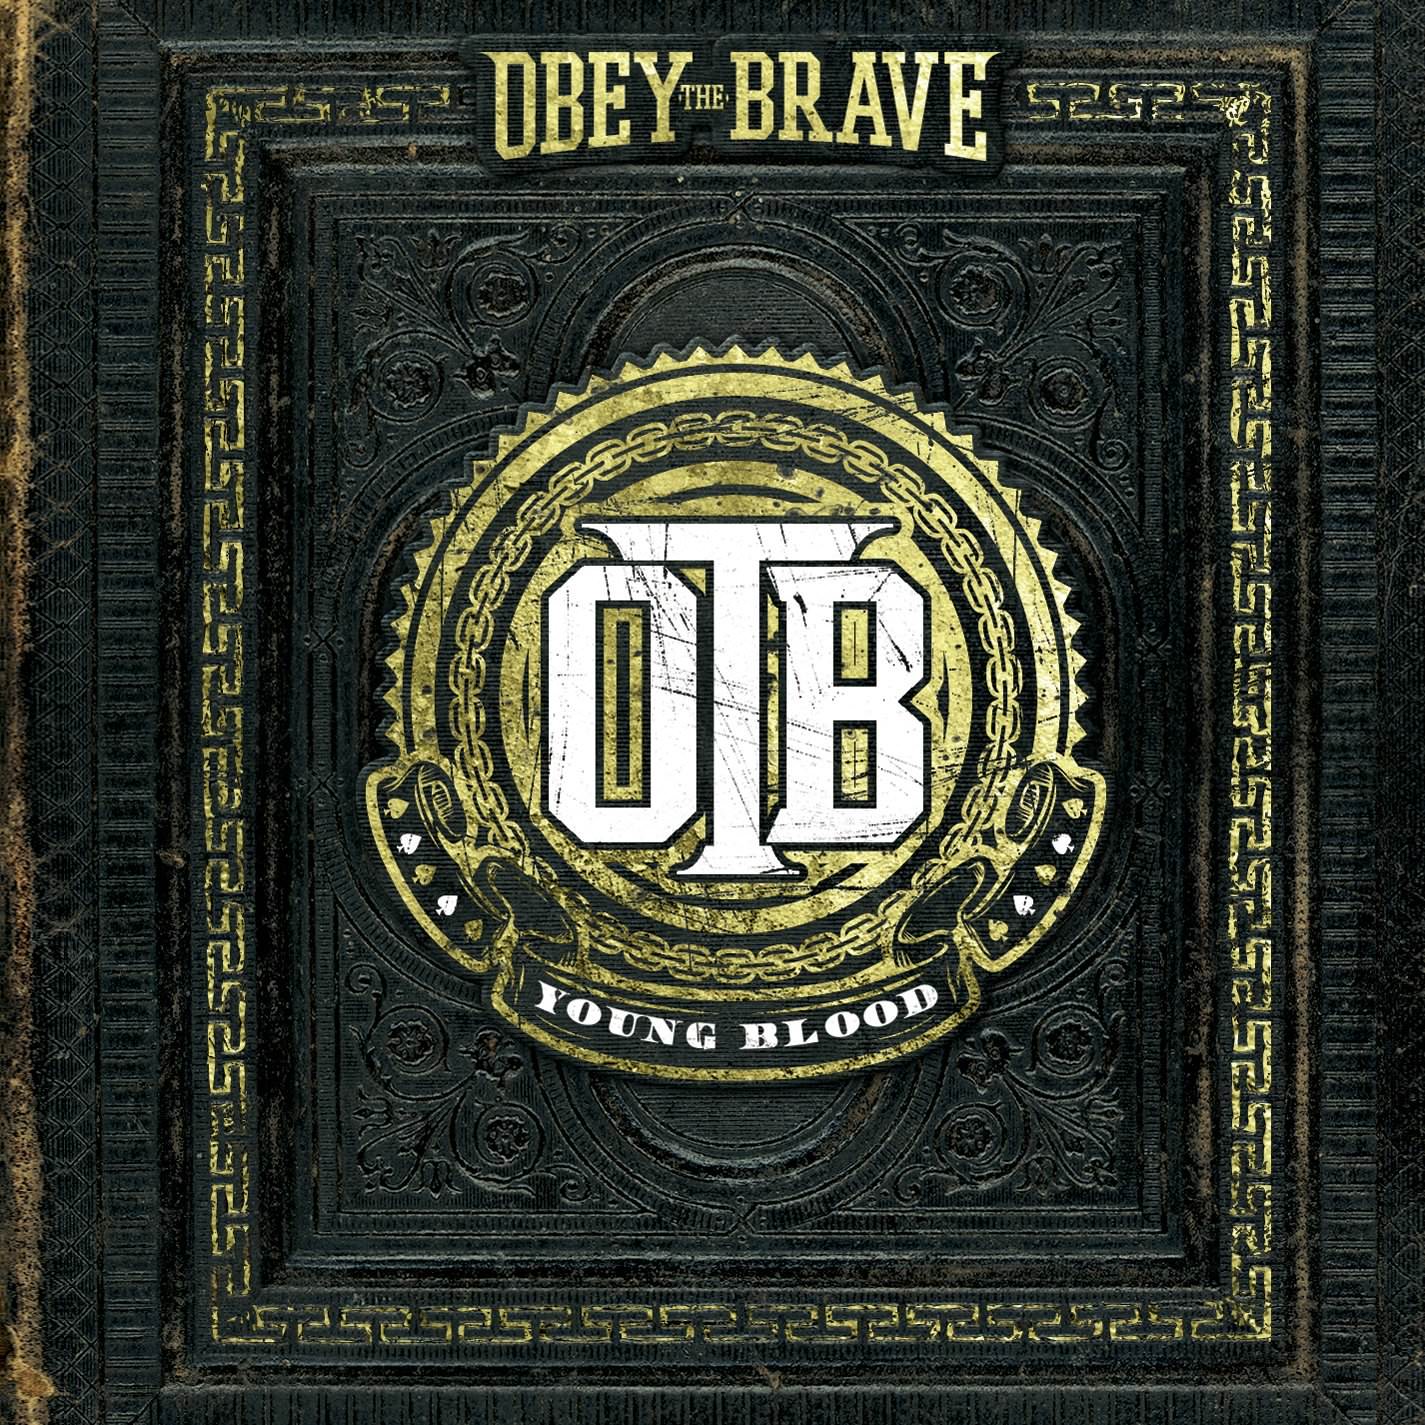 Obey The Brave - Young Blood (2012/2013) [Qobuz FLAC 24bit/44,1kHz]